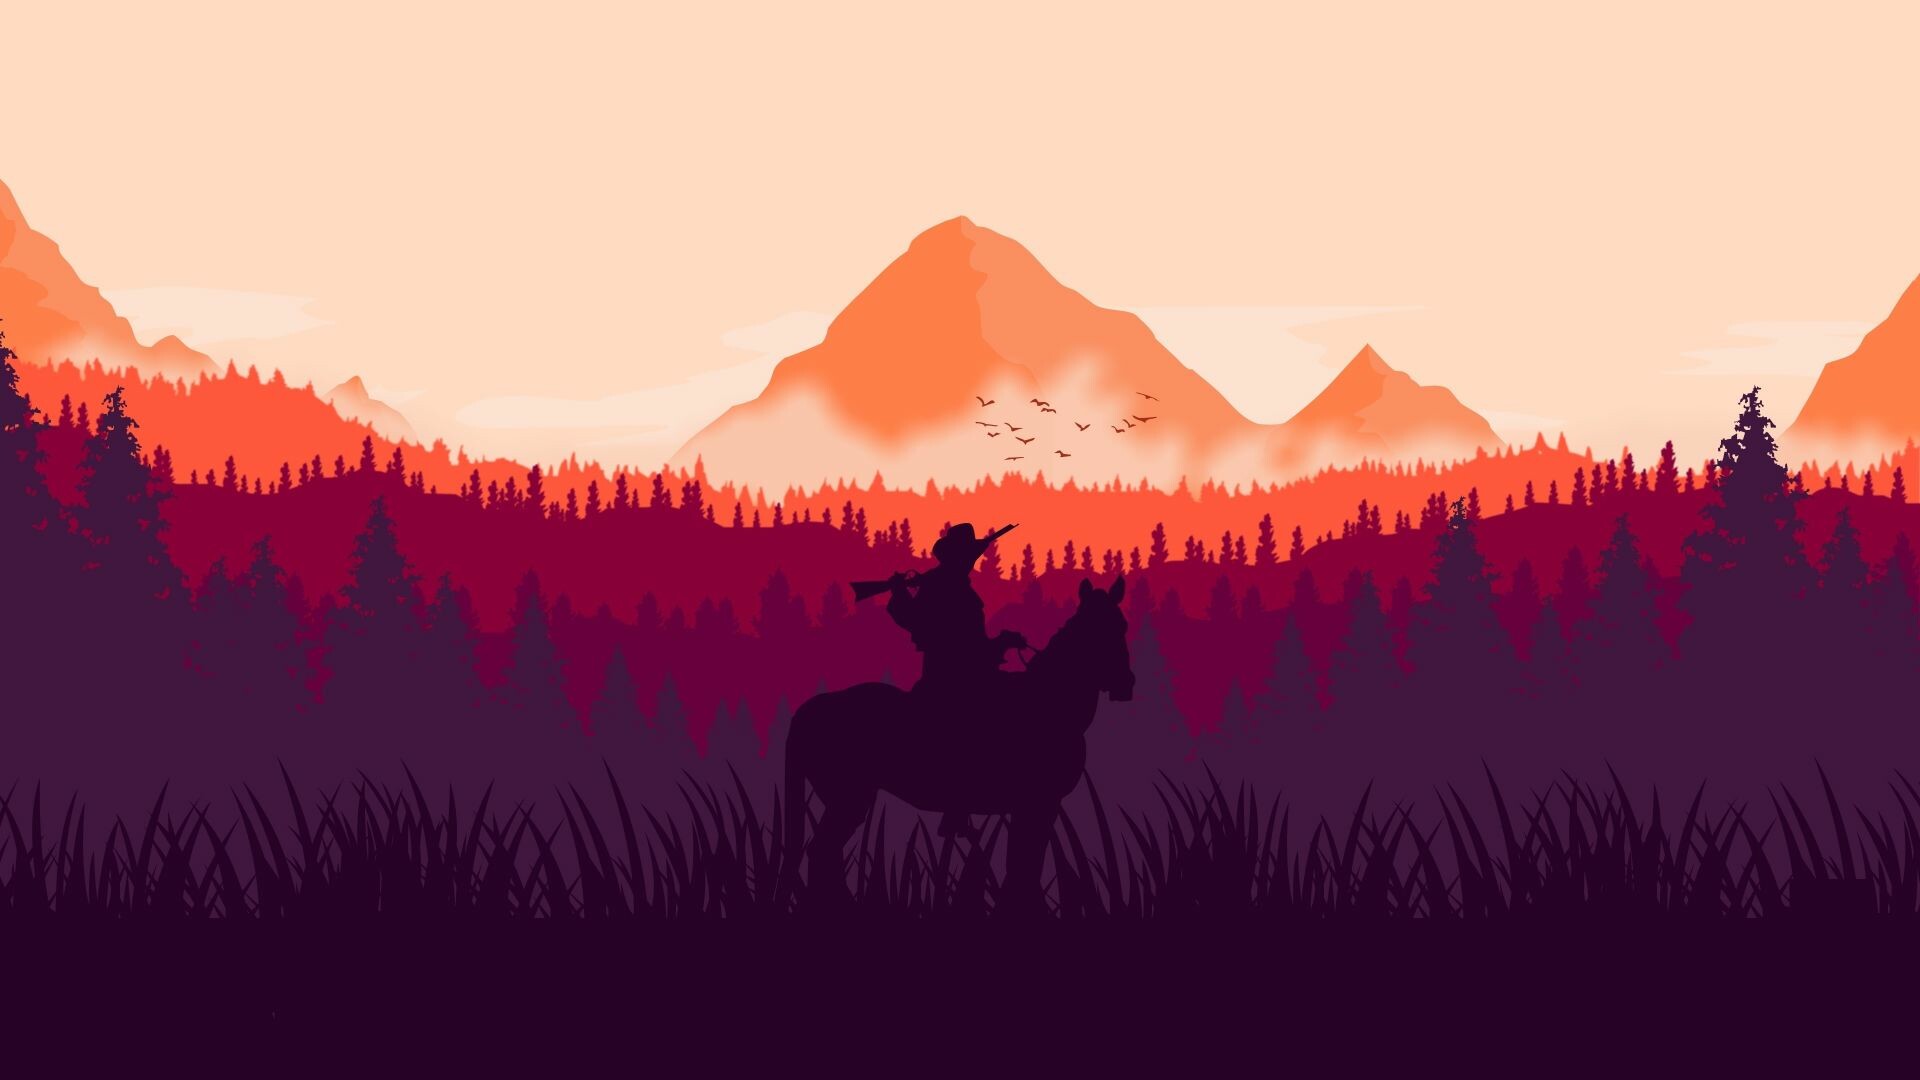 Red Dead Redemption: RDR2, Video game, Horse ride, Silhouette. 1920x1080 Full HD Wallpaper.